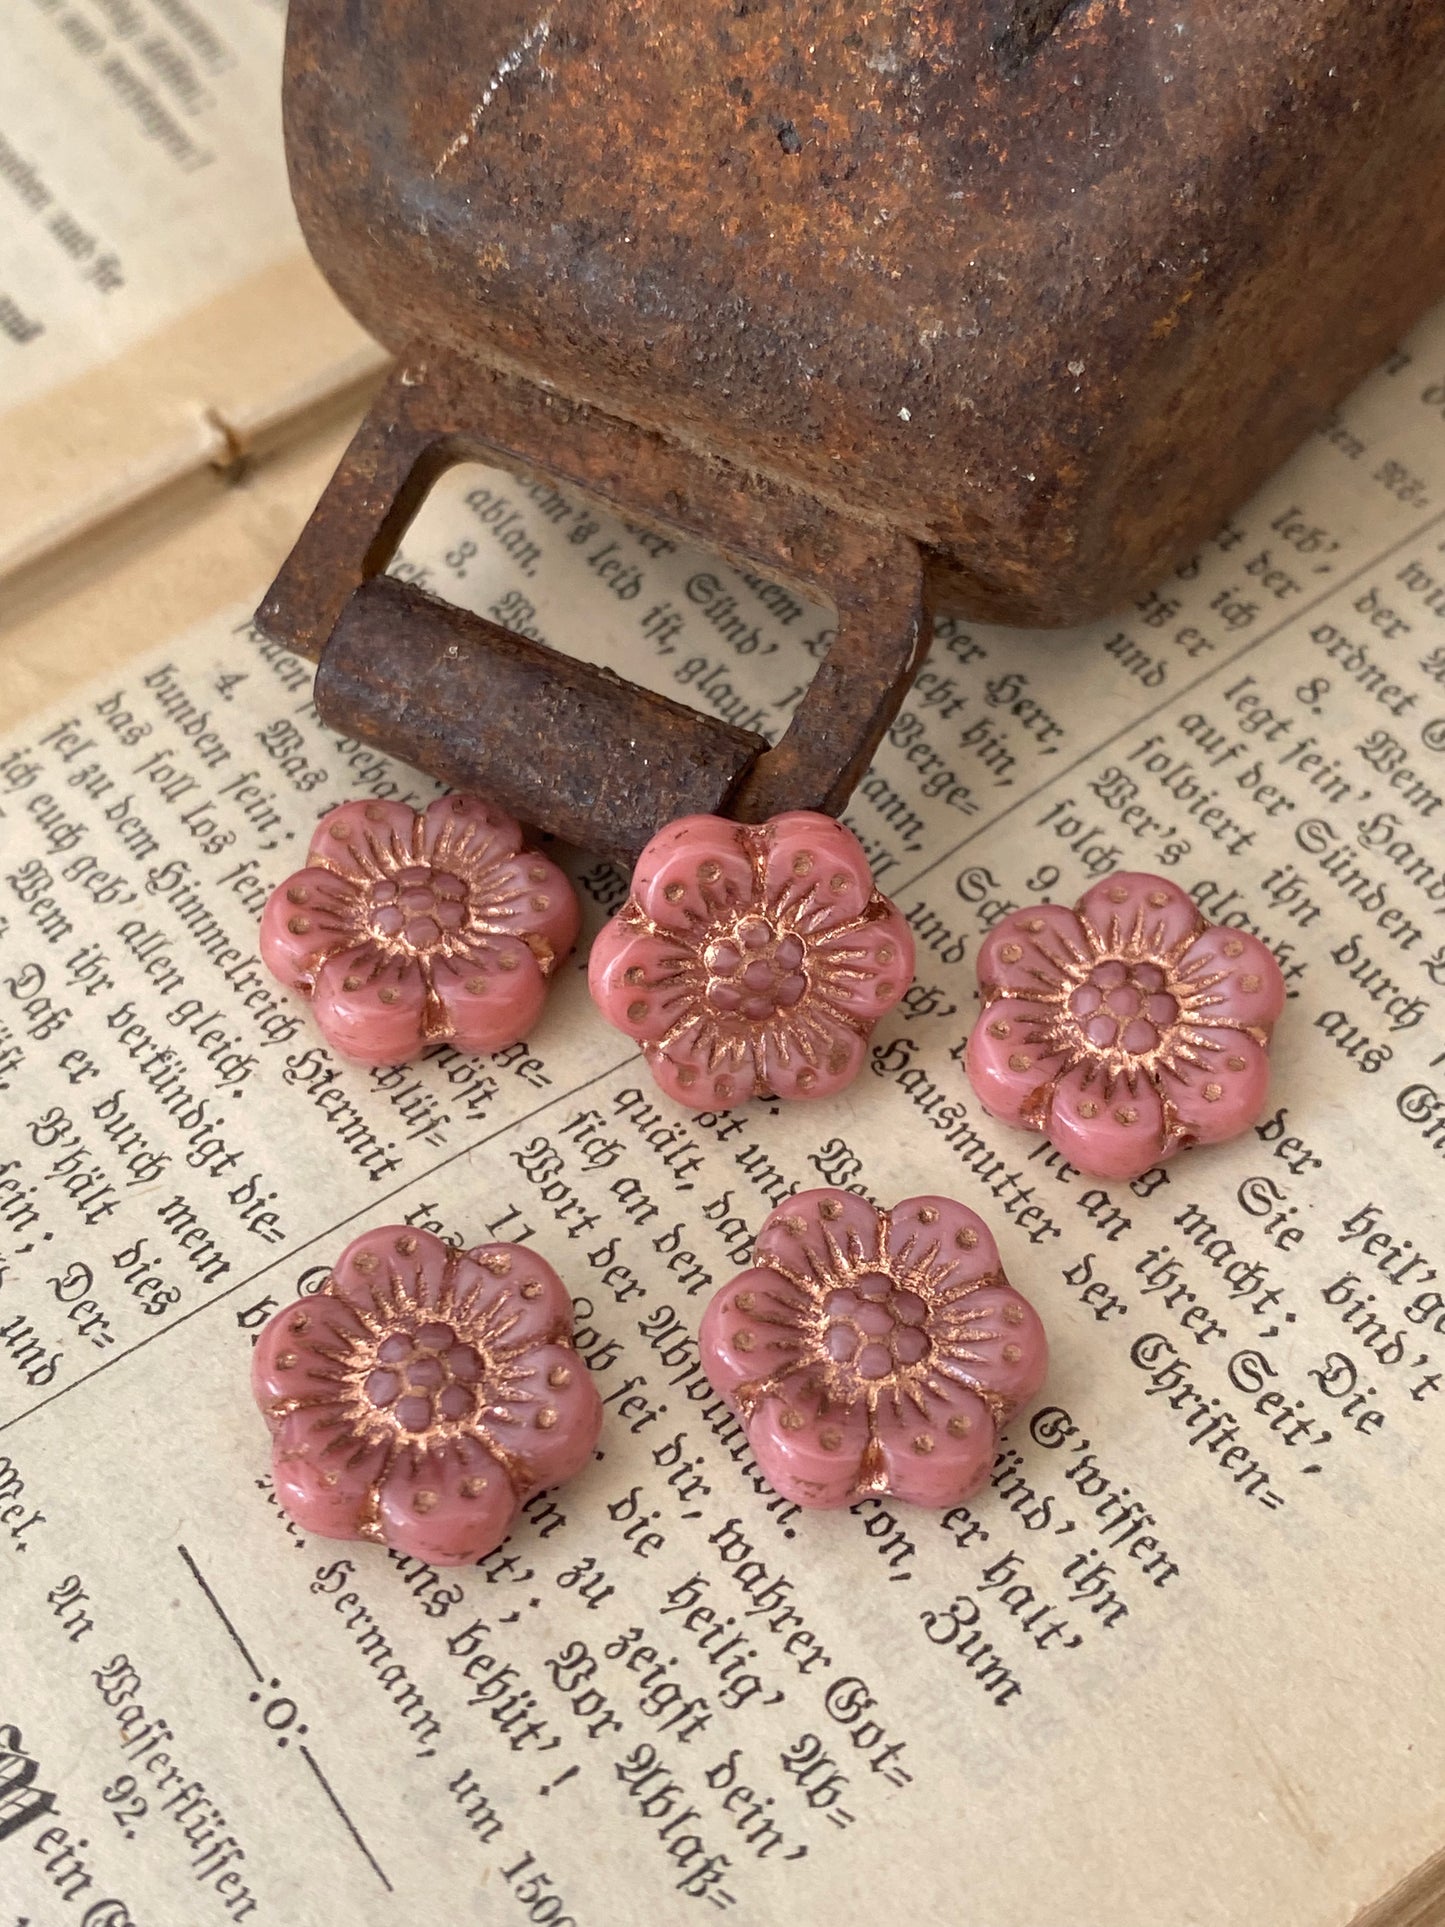 Premium Czech glass rose flowers, pink with copper wash, 14mm